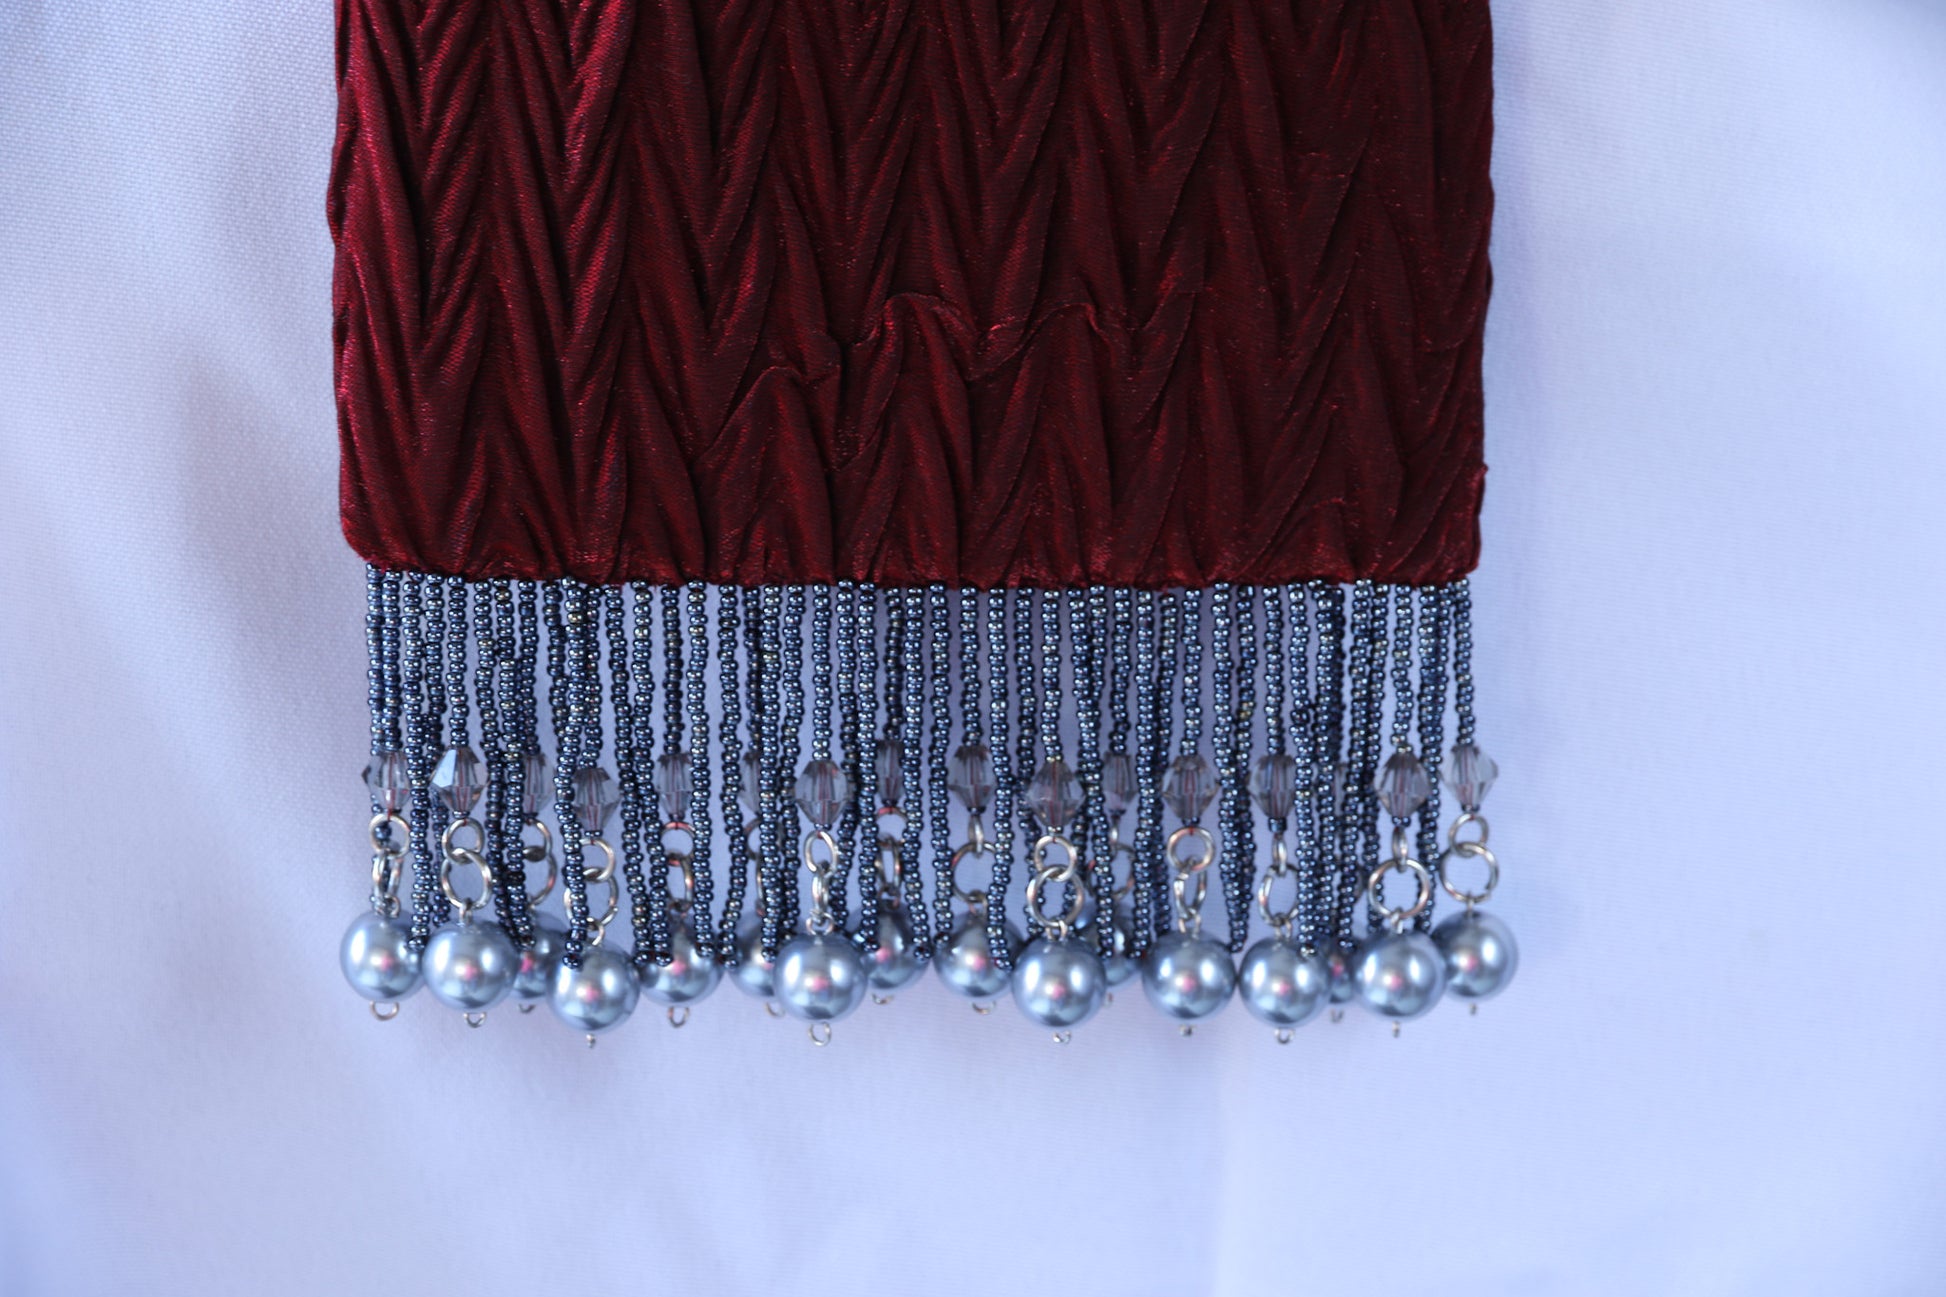 Burgundy Evening Bag from Jenny Jag-Wear Design. Close up photo showing the beaded fringe along the bottom o this small ladies evening bag. The Zara Collection from Jenny Jag-Wear Design.